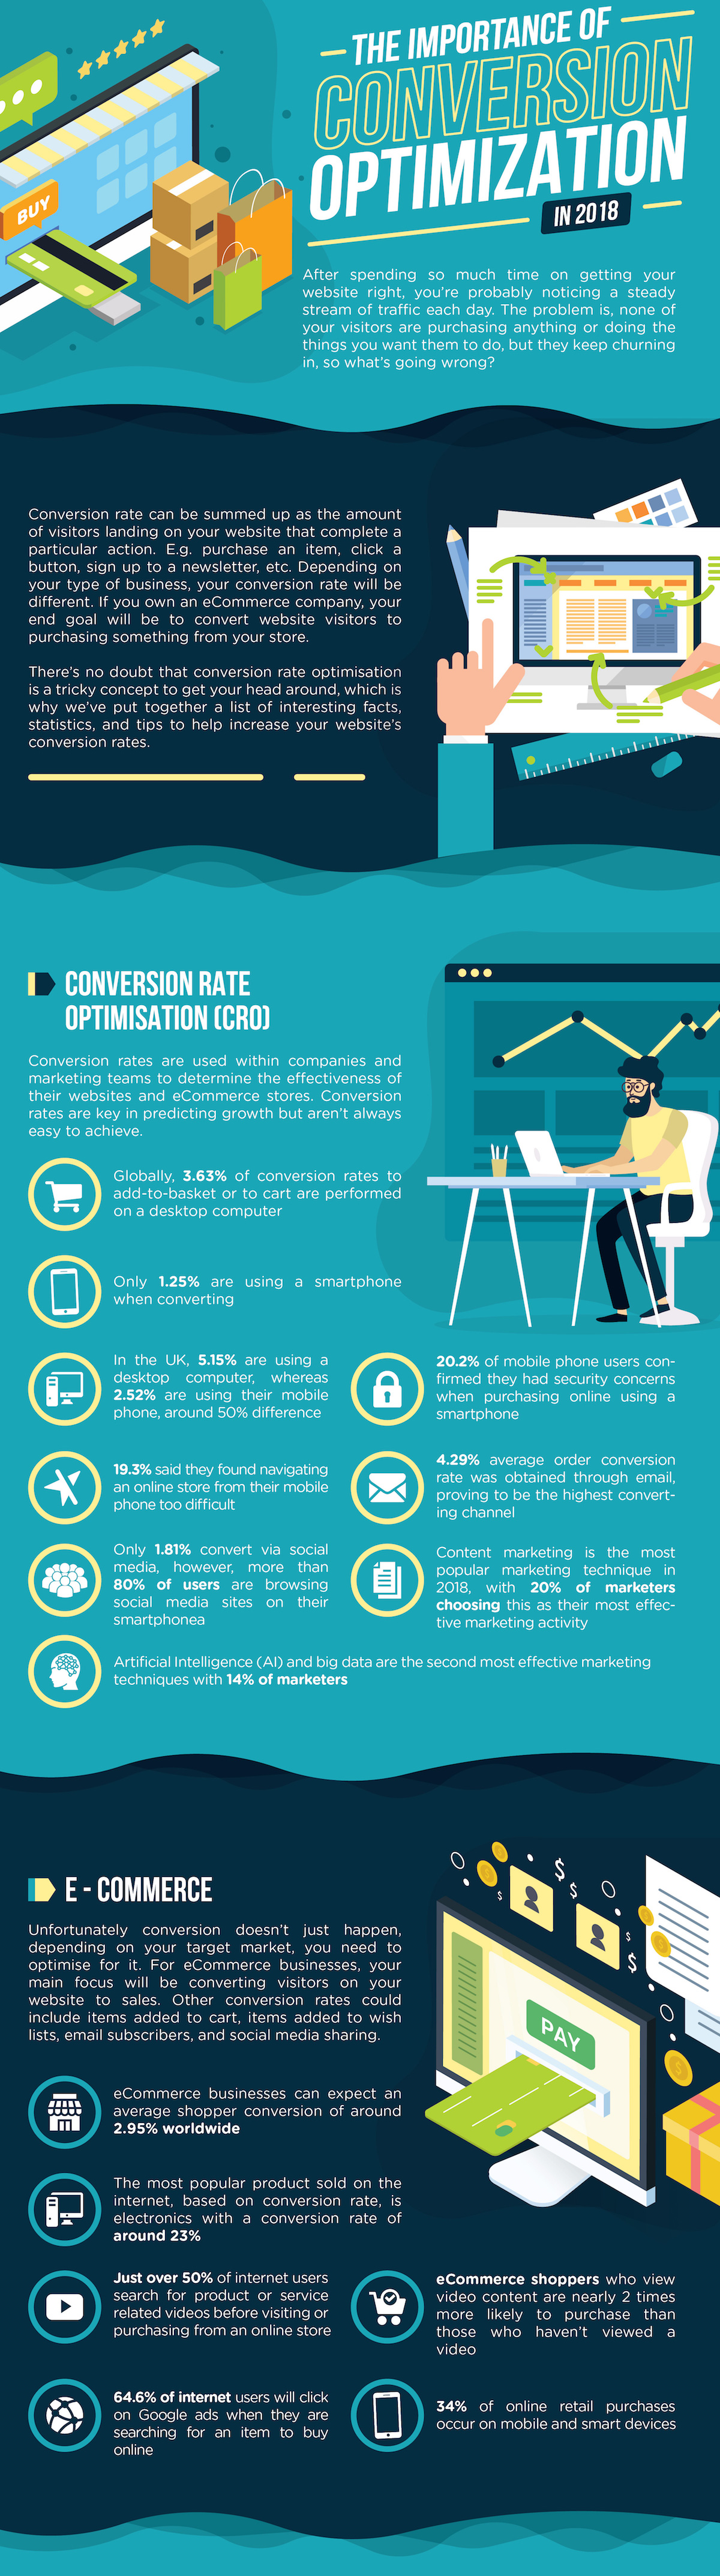 On this infographic by Top 10 Website Hosting, you'll find tips and tricks on how you can optimize your eCommerce conversions.